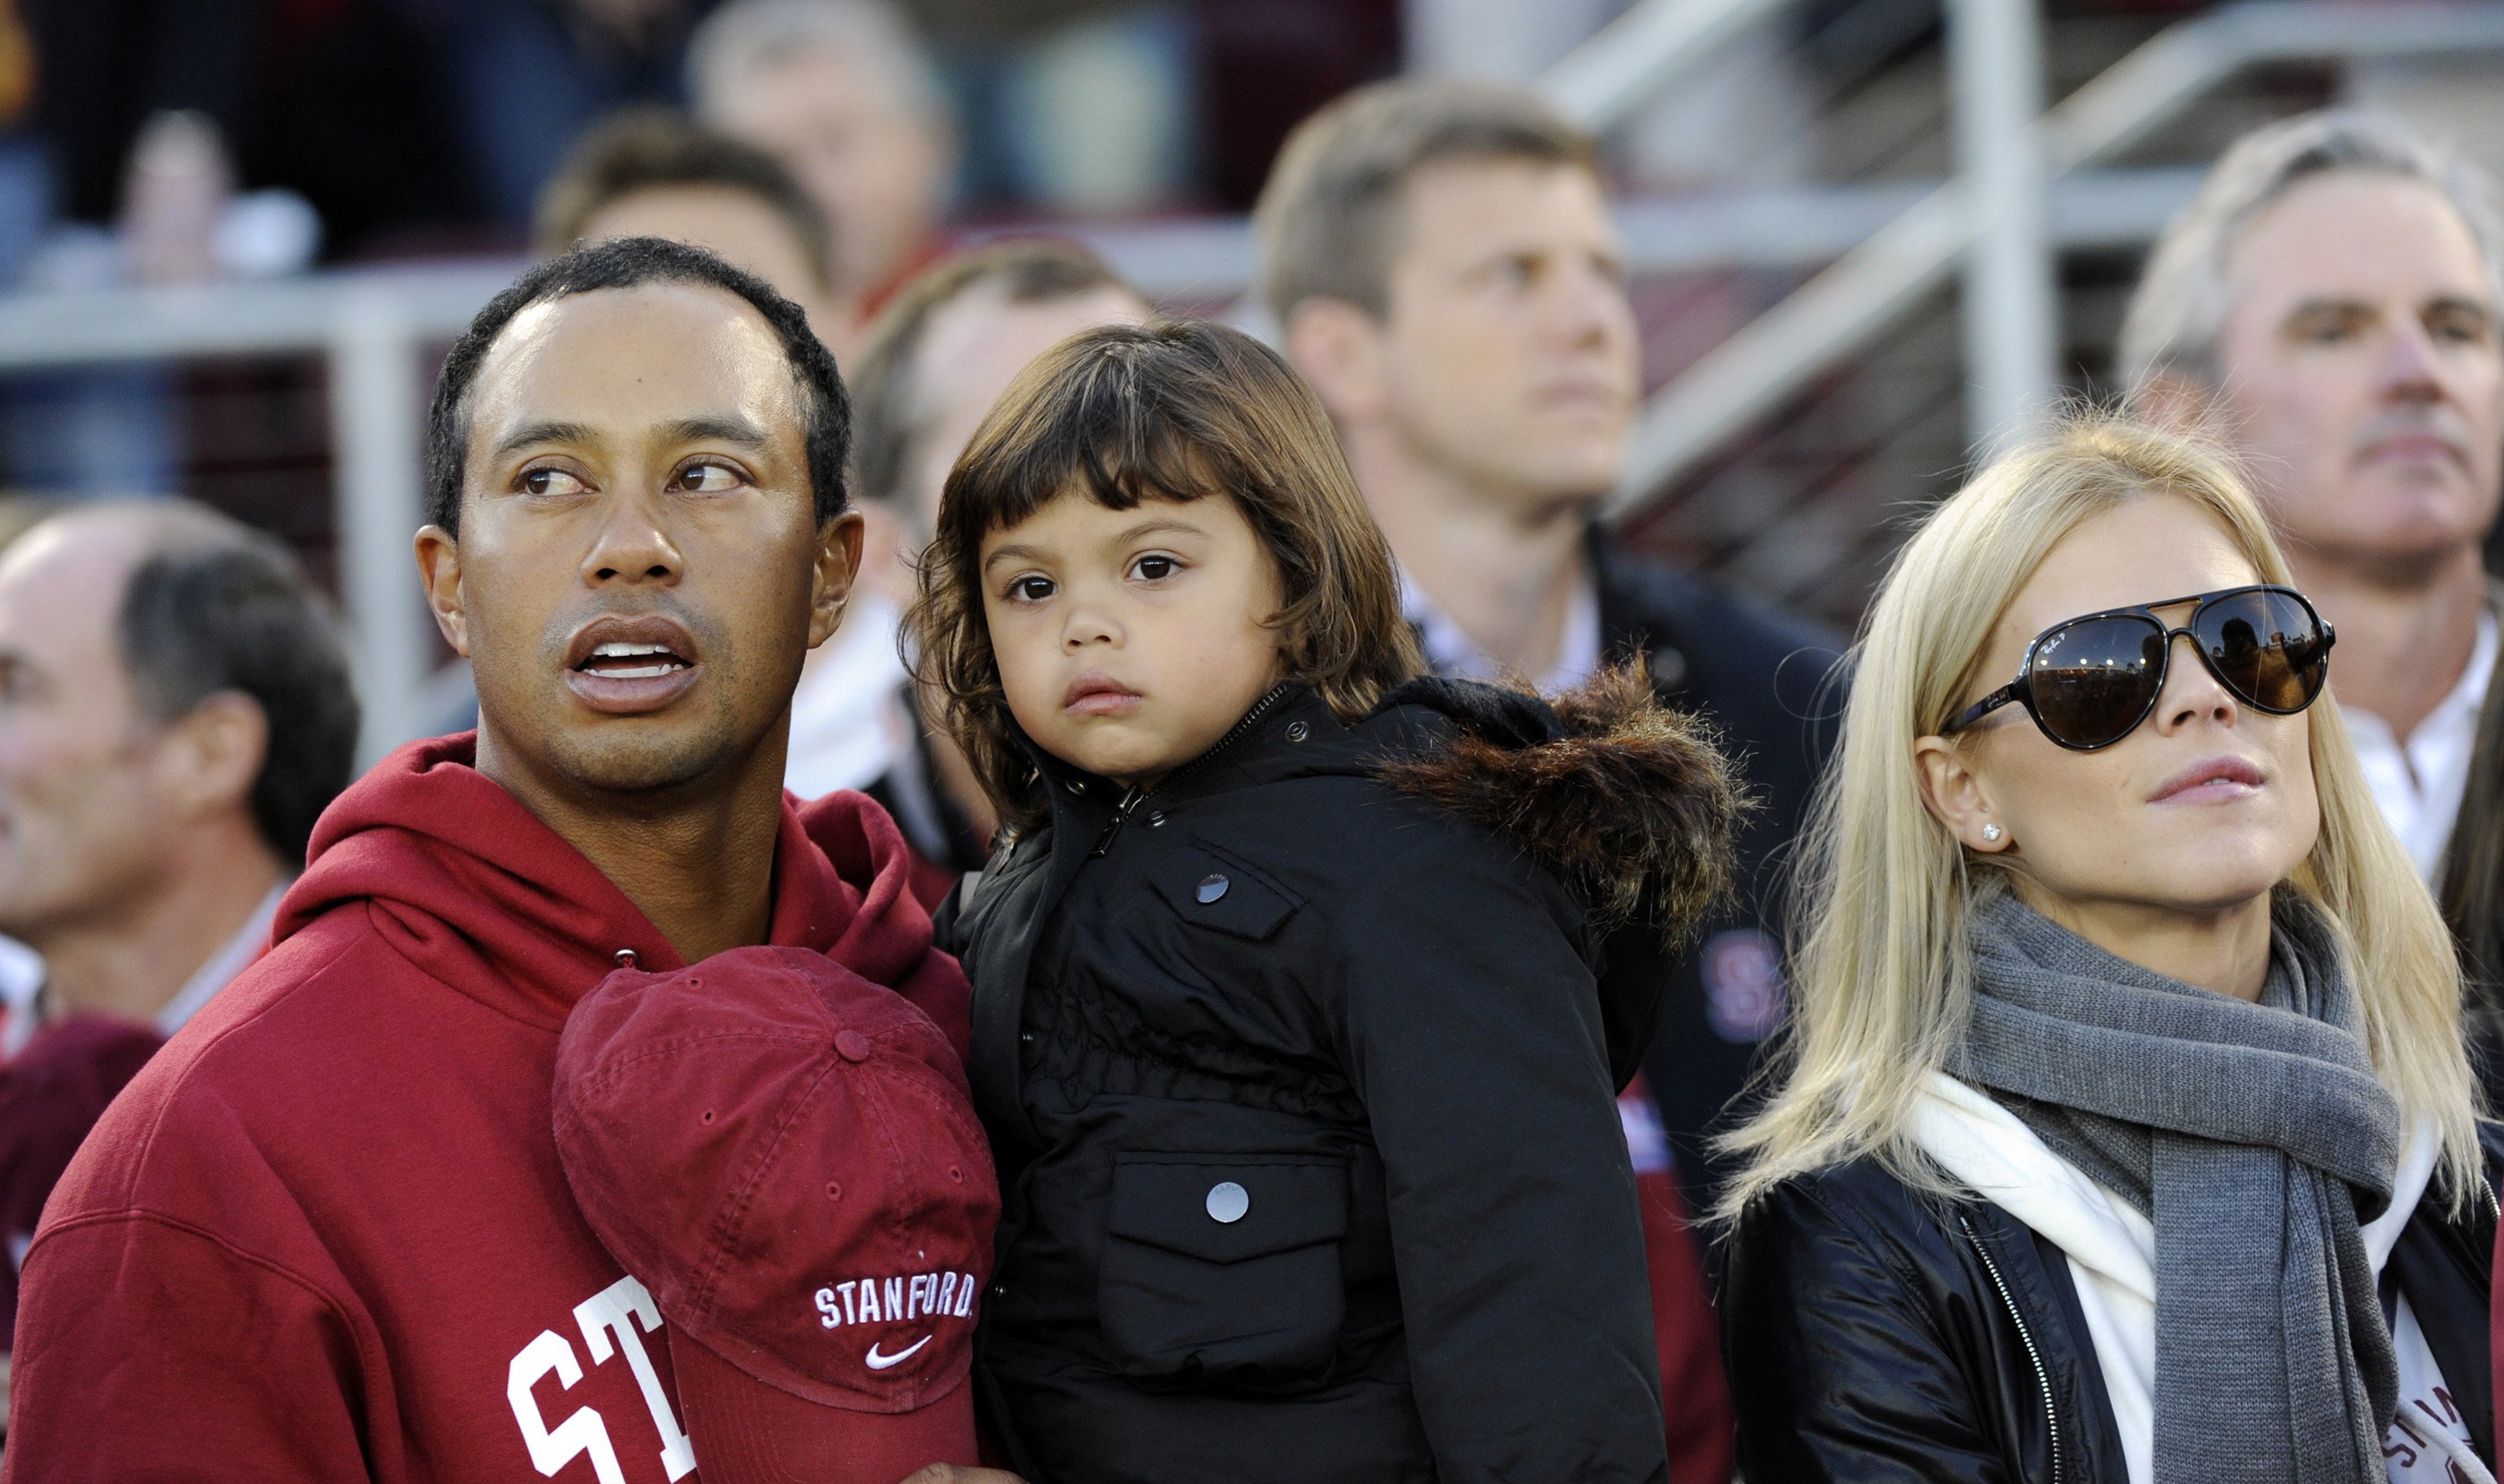 Tiger Woods pictured with daughter Sam Alexis Woods, and wife Elin Woods on sidelines during an NCAA football game at Stanford Stadium, Stanford, California. / Source: Getty Images